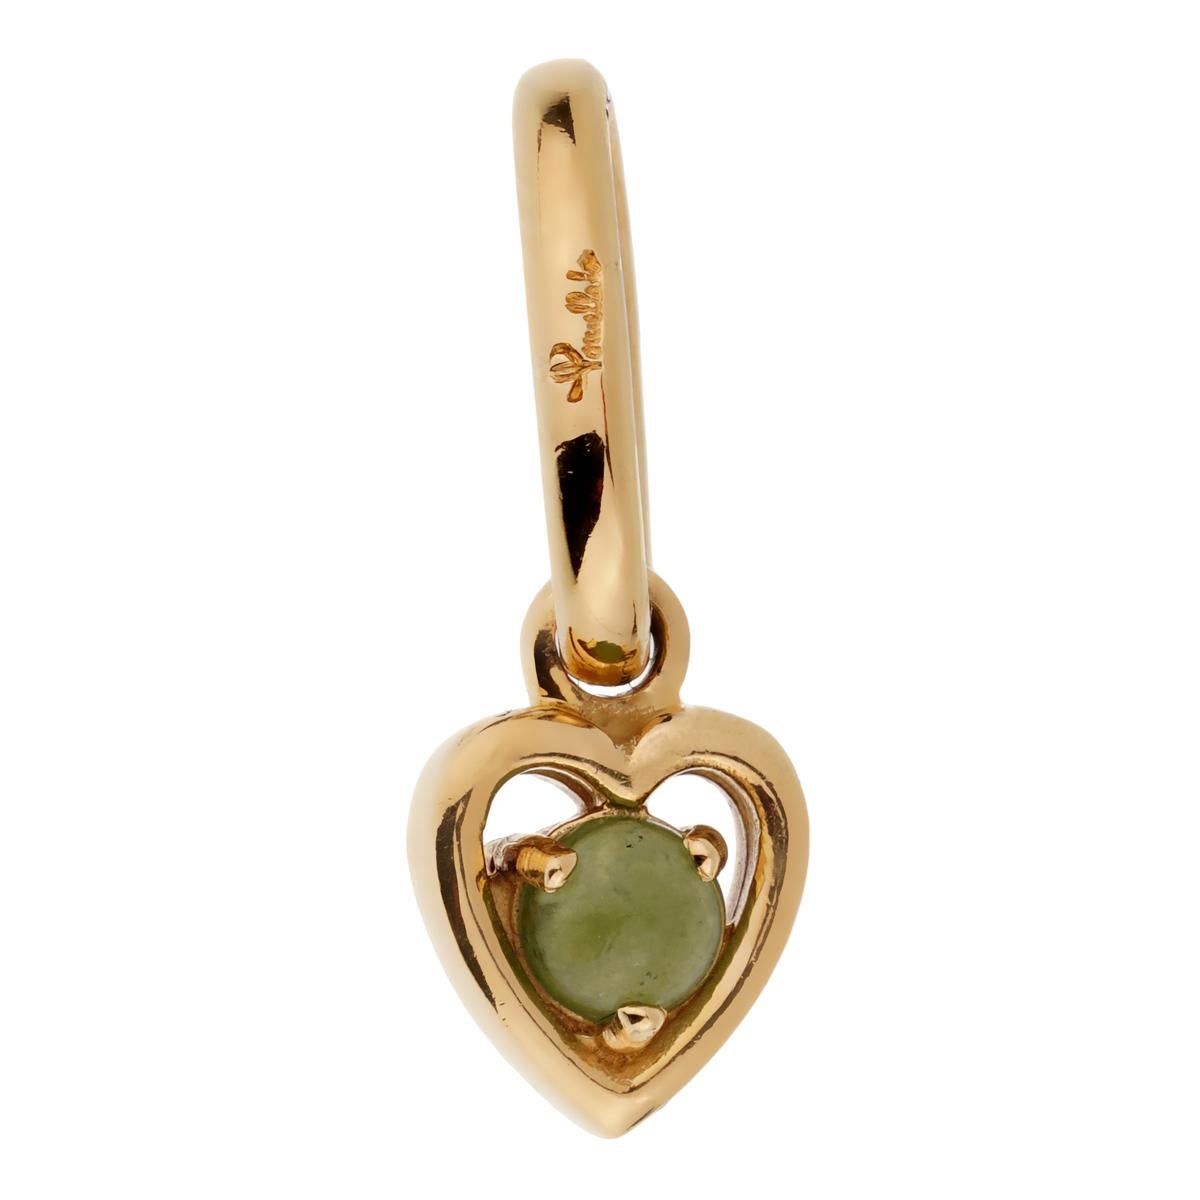 A chic brand new Pomellato charm pendant featuring a .35ct Green Chalcedony set in 18k yellow gold. 

Sku: 2302